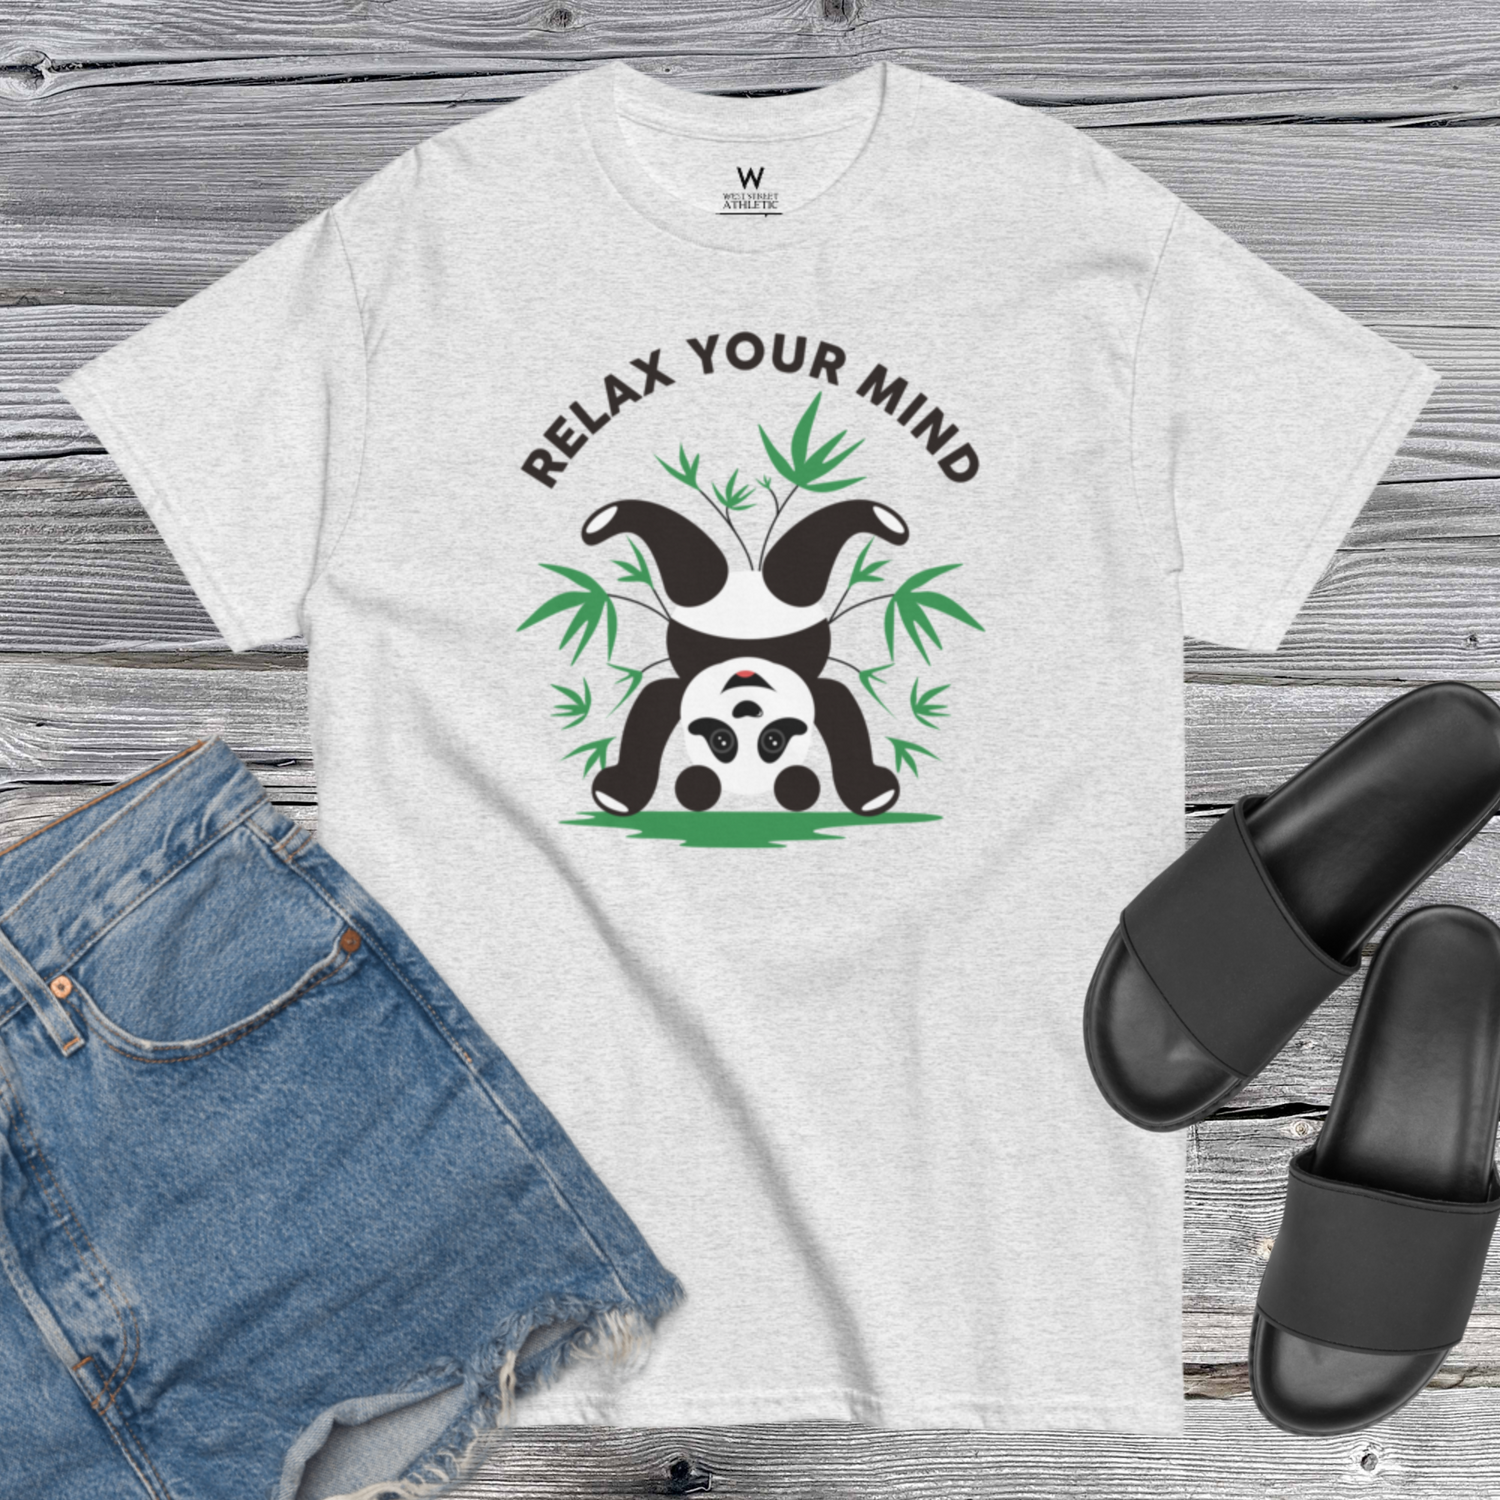 Yoga Tees - Relax Your Mind Tee